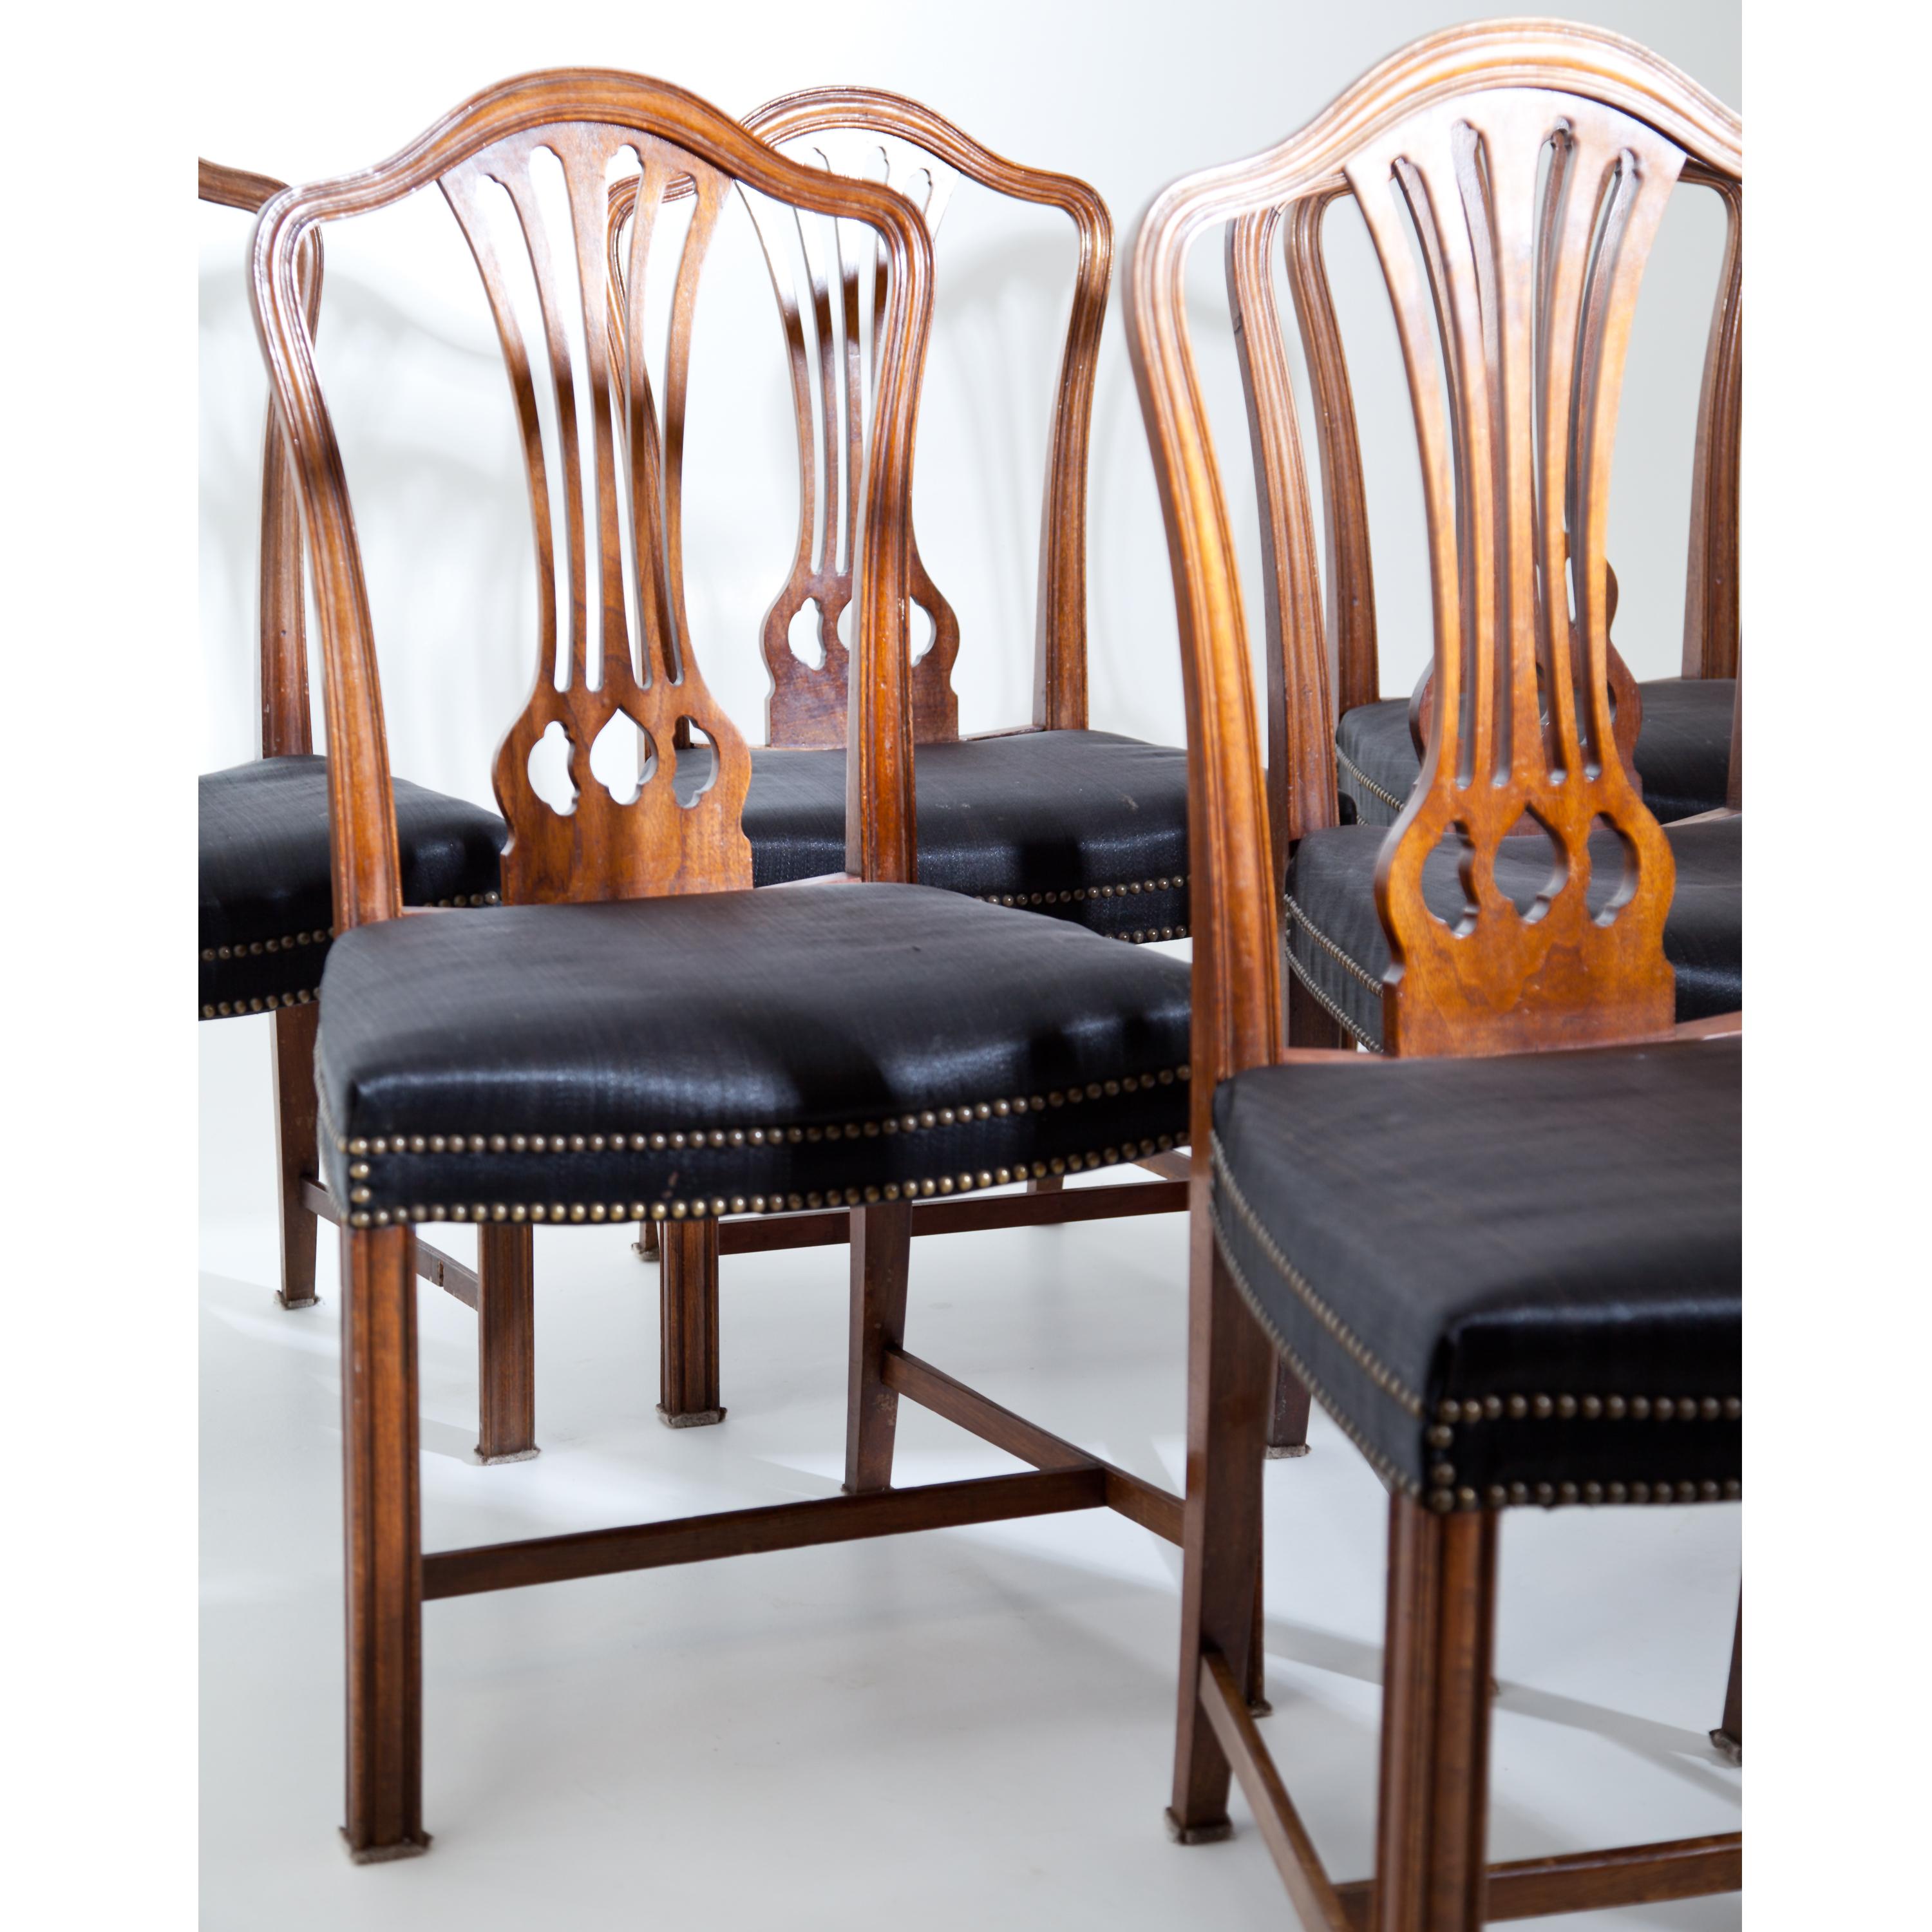 English Mahogany Dining Room Chairs after Chippendale, England, circa 1800